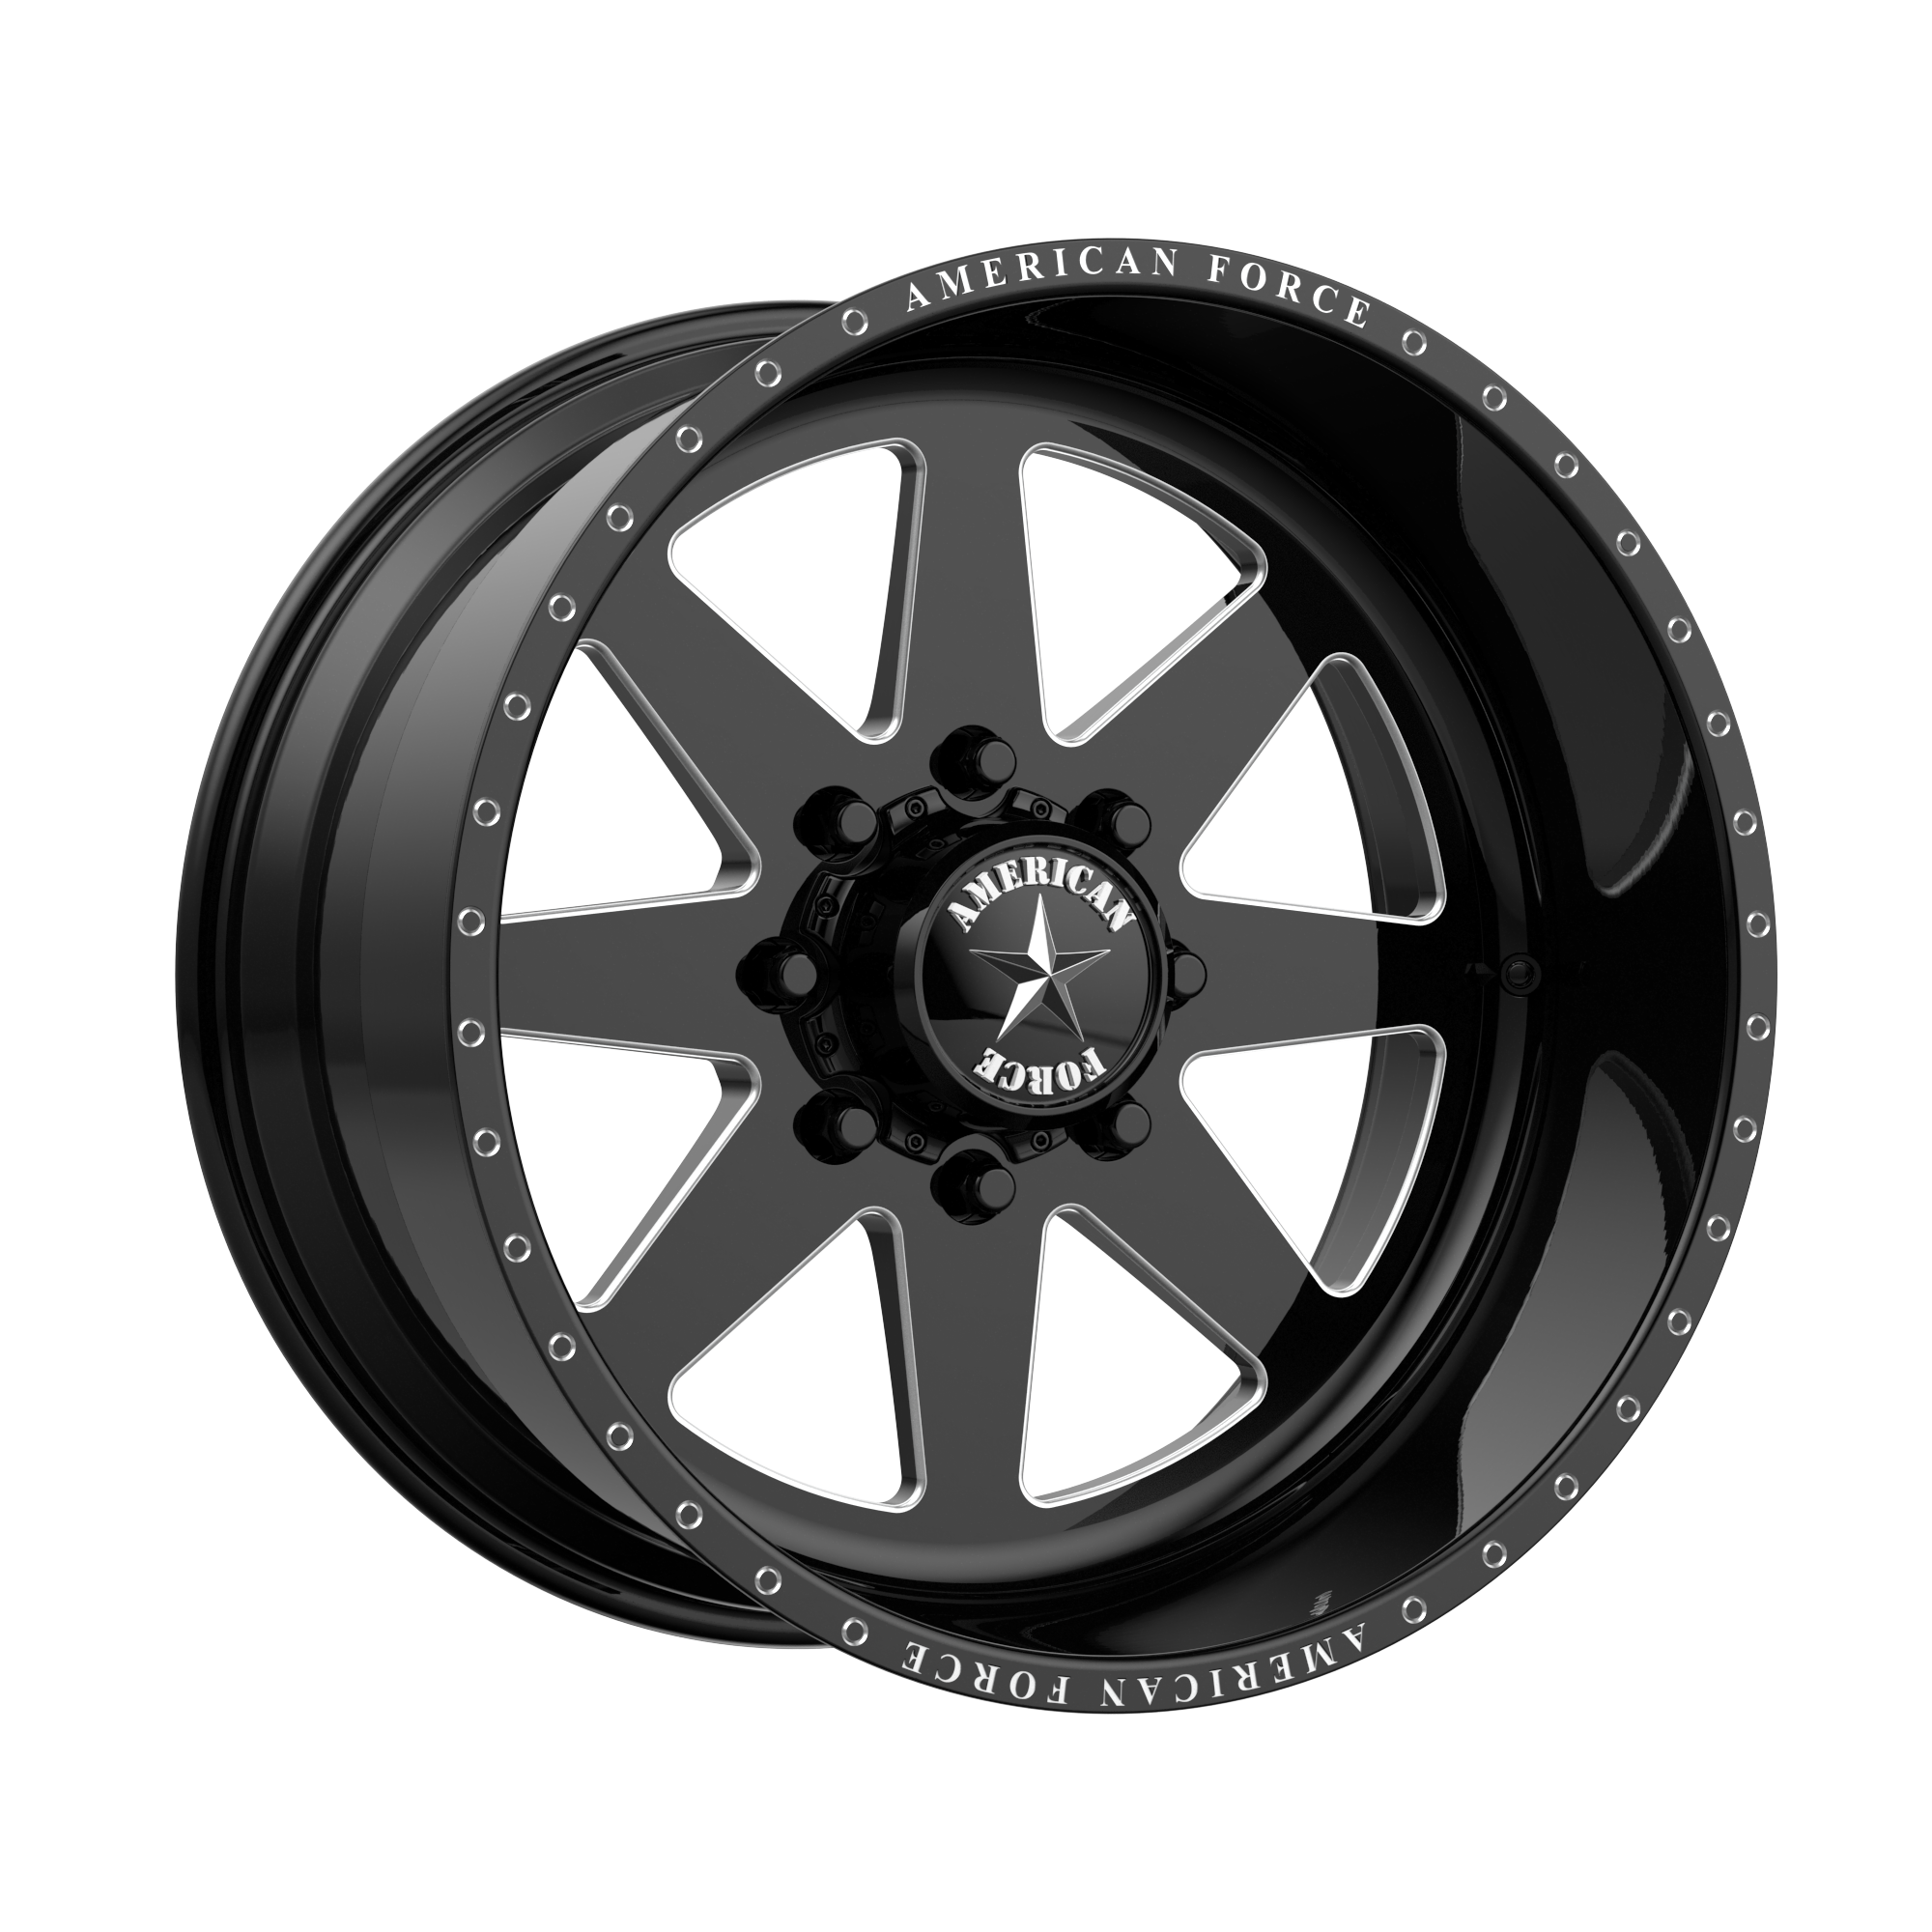 INDEPENDENCE SS 26x16 6x139.70 GLOSS BLACK MACHINED (-101 mm) - Tires and Engine Performance